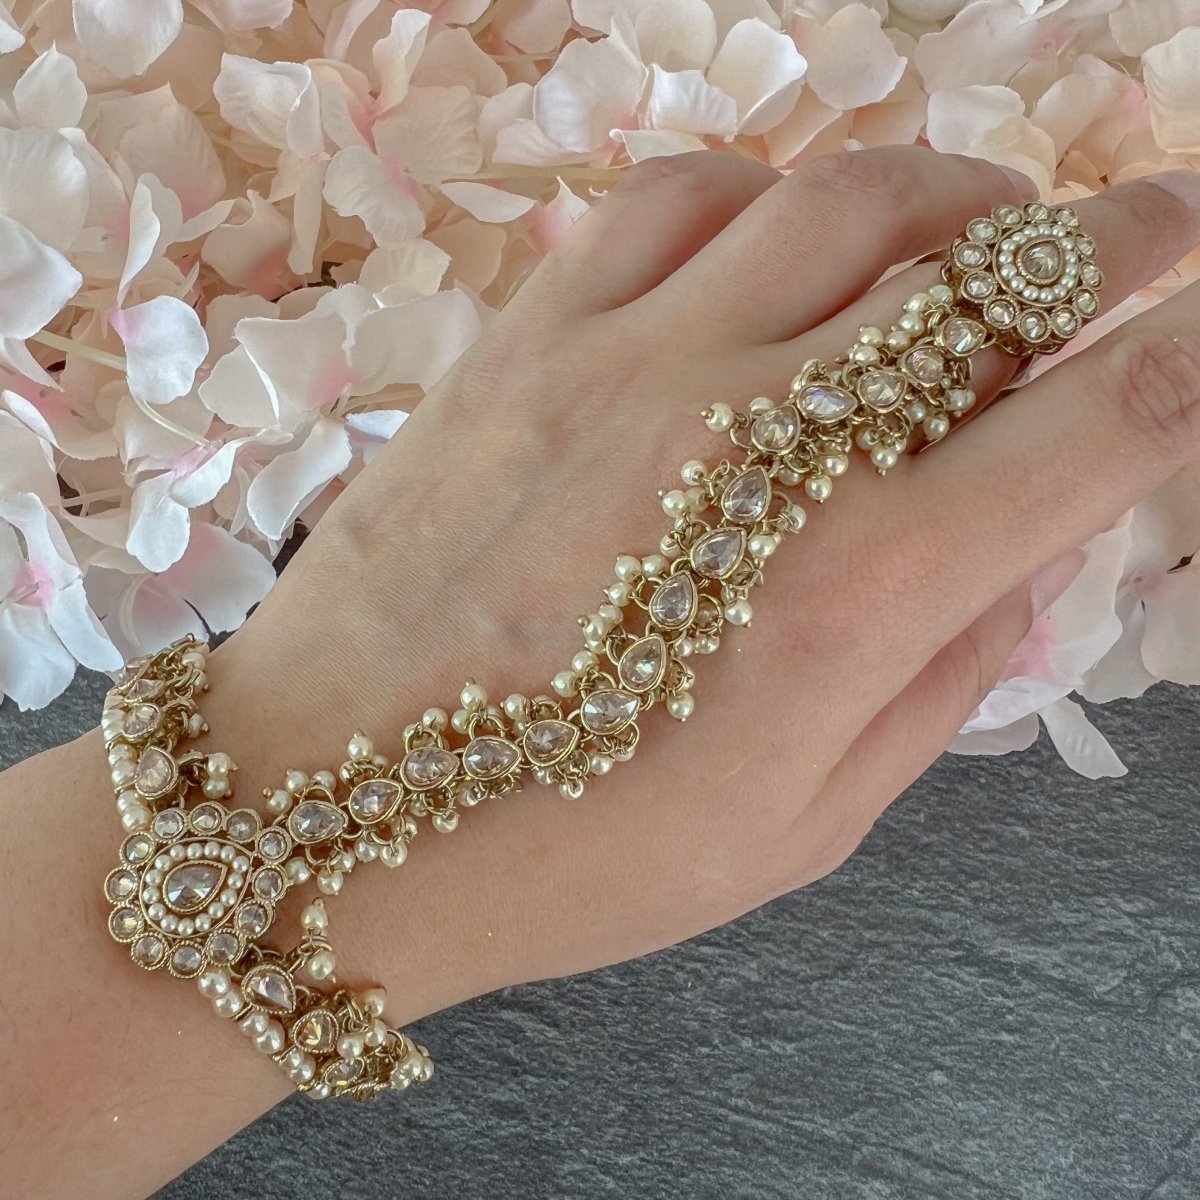 Statement Pearl Droplet Hand Harness - Champagne - SOKORA JEWELSStatement Pearl Droplet Hand Harness - Champagne